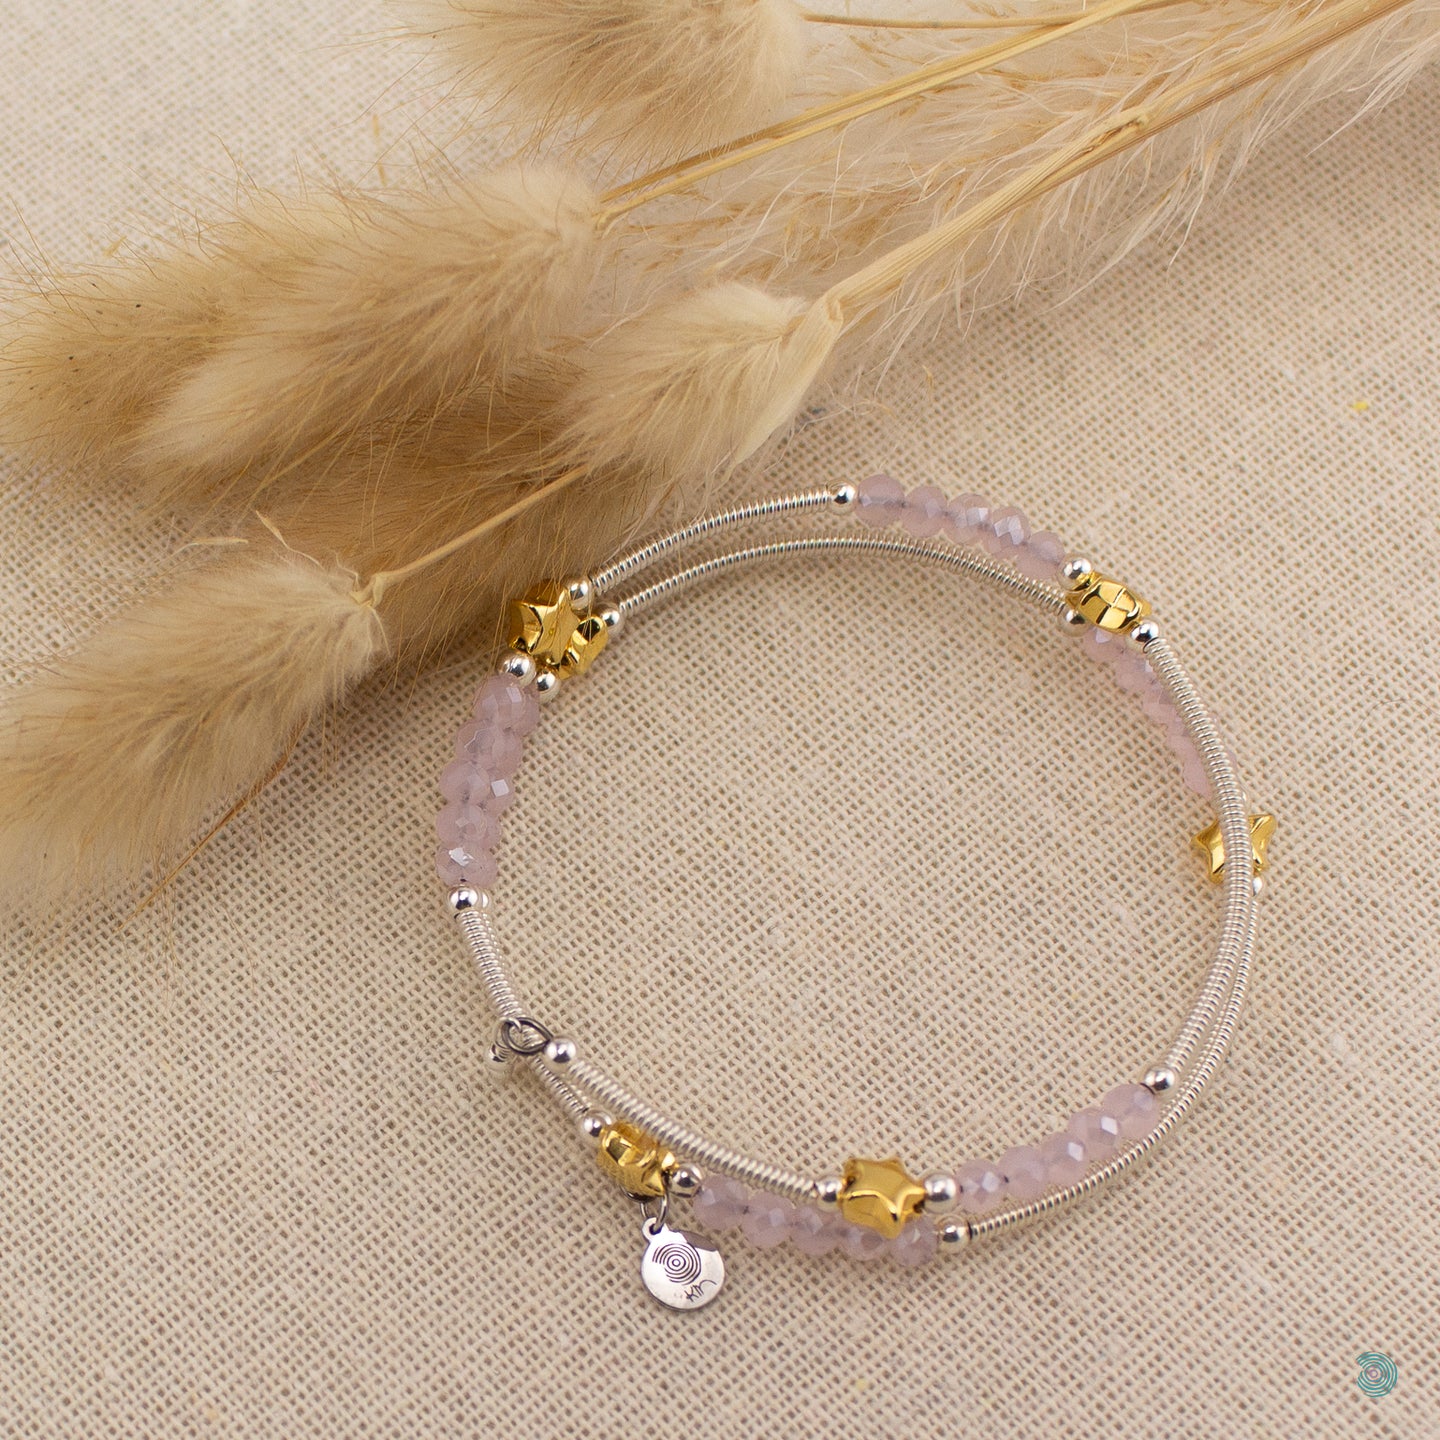 Hand wrapped silver filled tubes, with pretty pink faceted crystal beads and gold plated stars with sterling silver small bead detail. This bracelet is approximately 6 cm in diameter and simple wraps around the wrist to sit in place without the need of a clasp. It comes presented in a pretty gift pouch for safe keeping, or making it perfect for gift giving. Designed and Handmade in Dingle